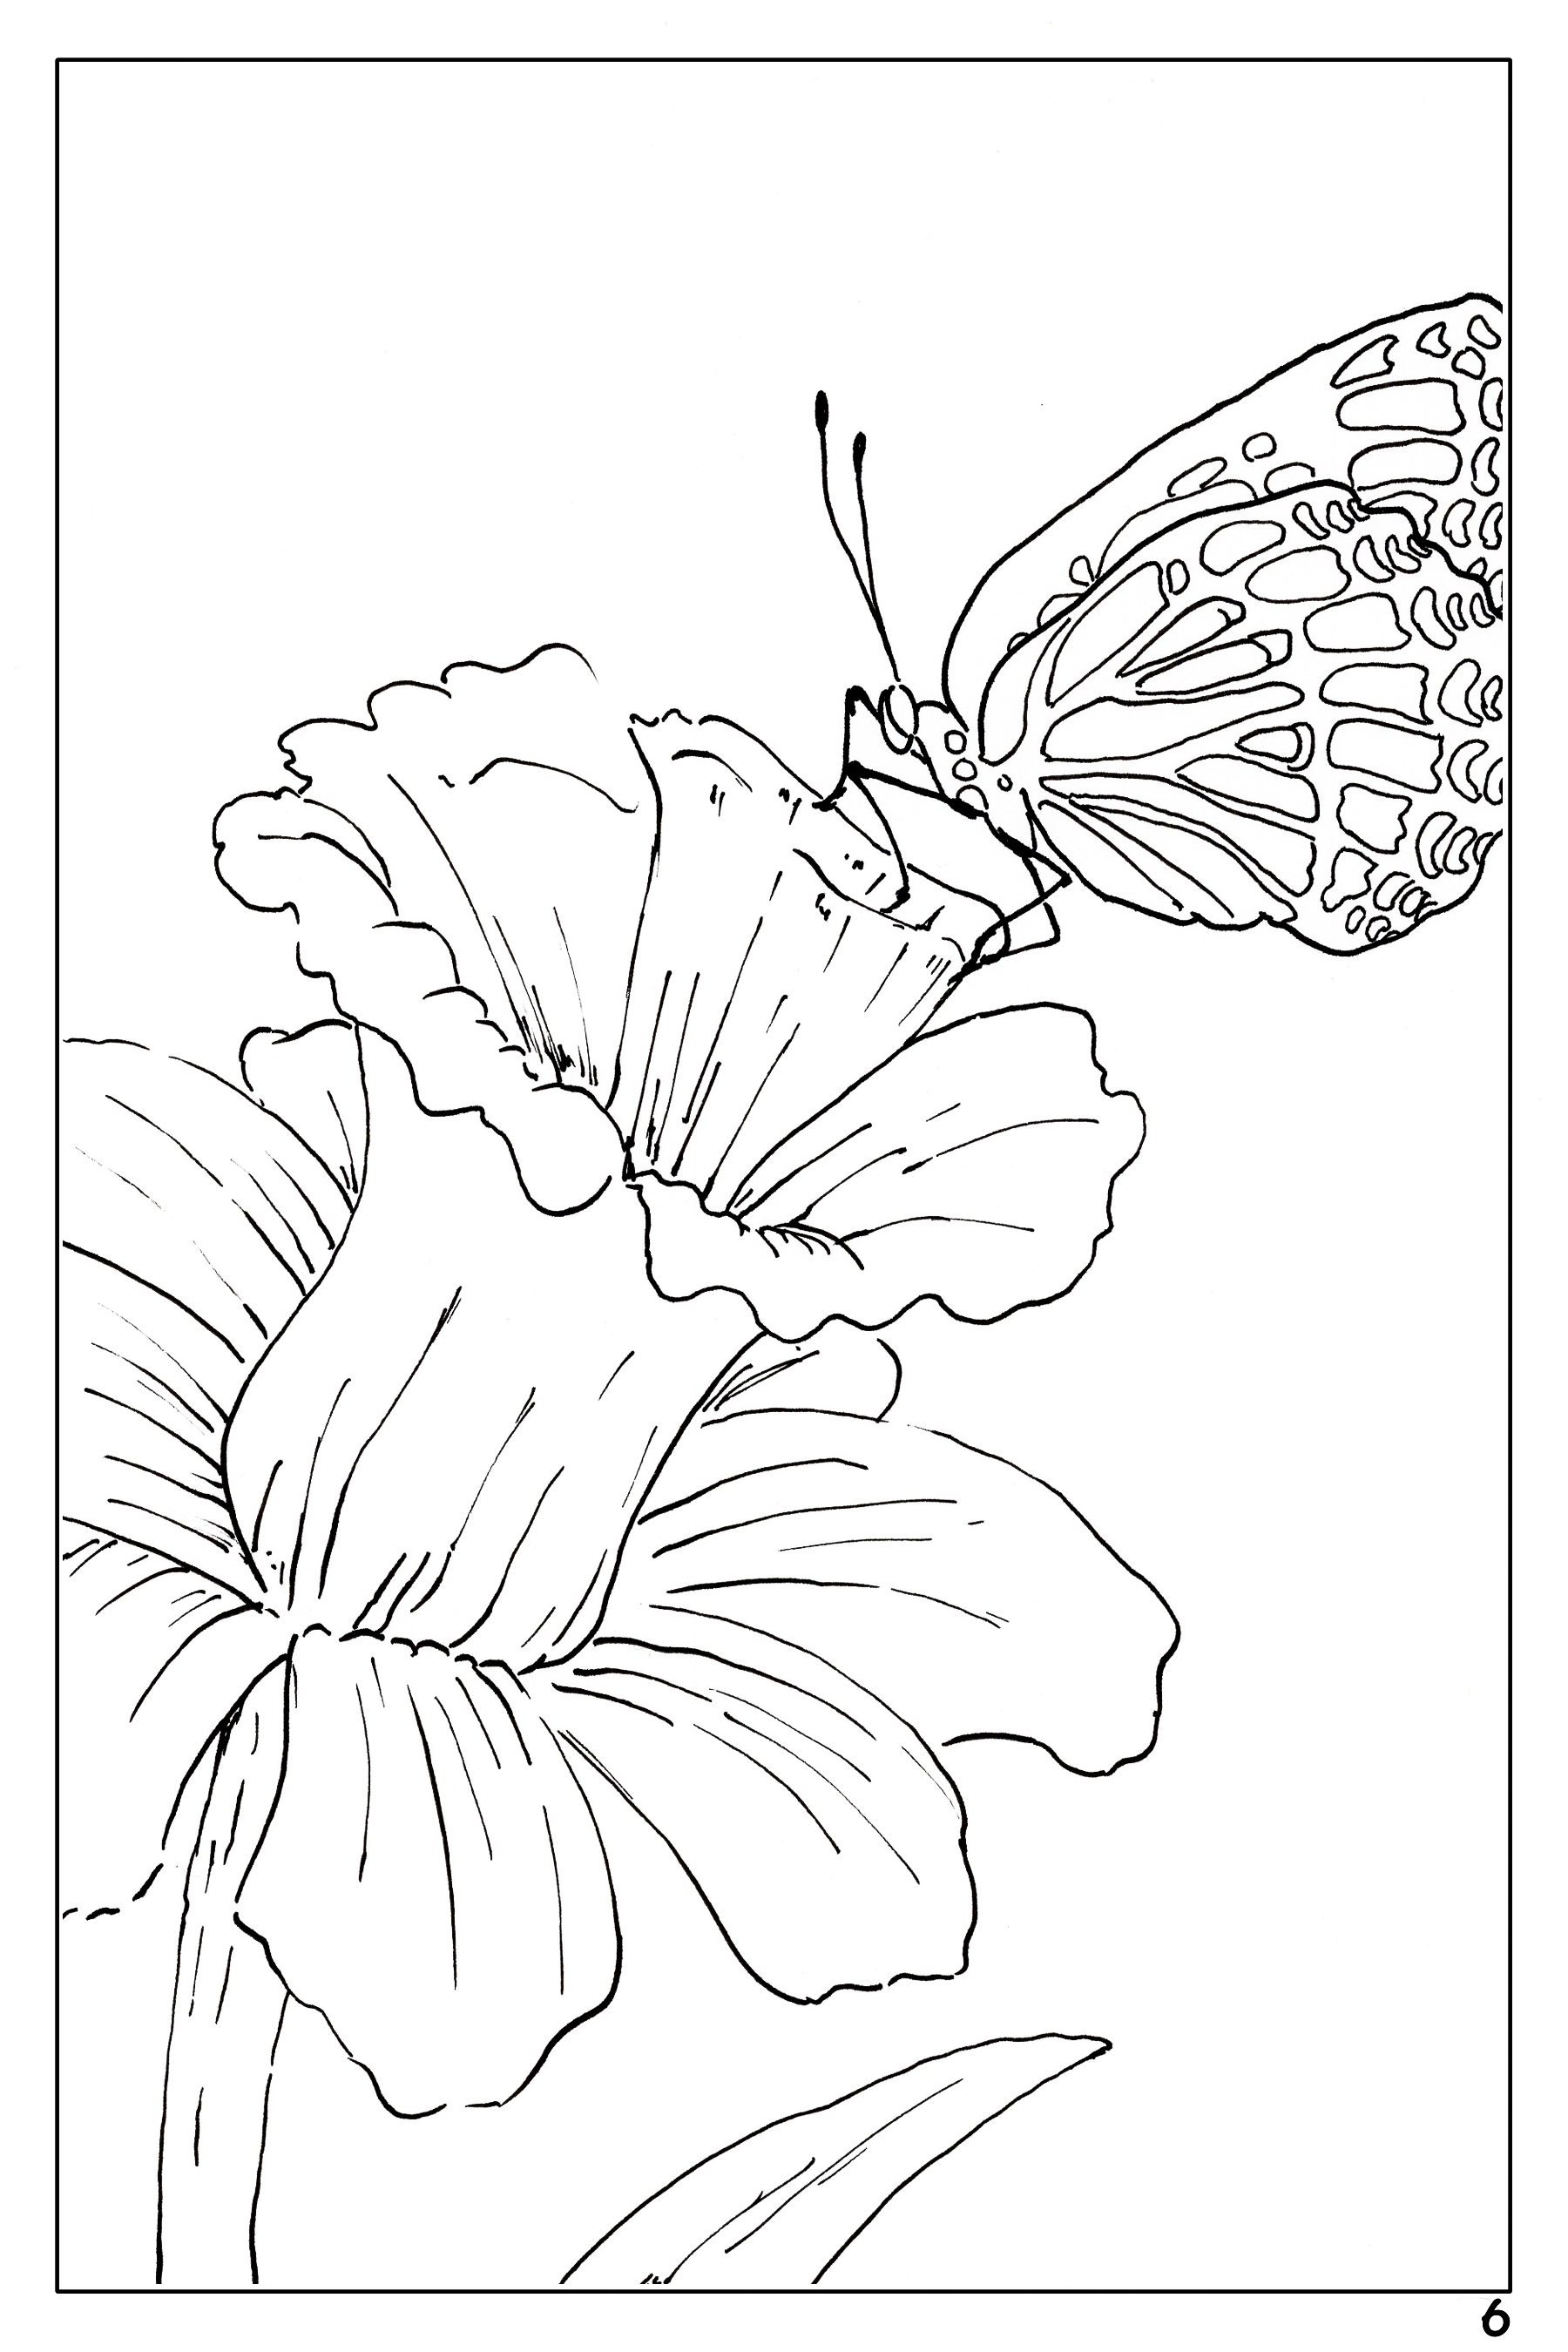 Cute COLORING BOOK, Honey BEE Gifts, Activity Books, Floral Bee Printable  Relaxing Coloring Page, Botanical Insect Entertainment